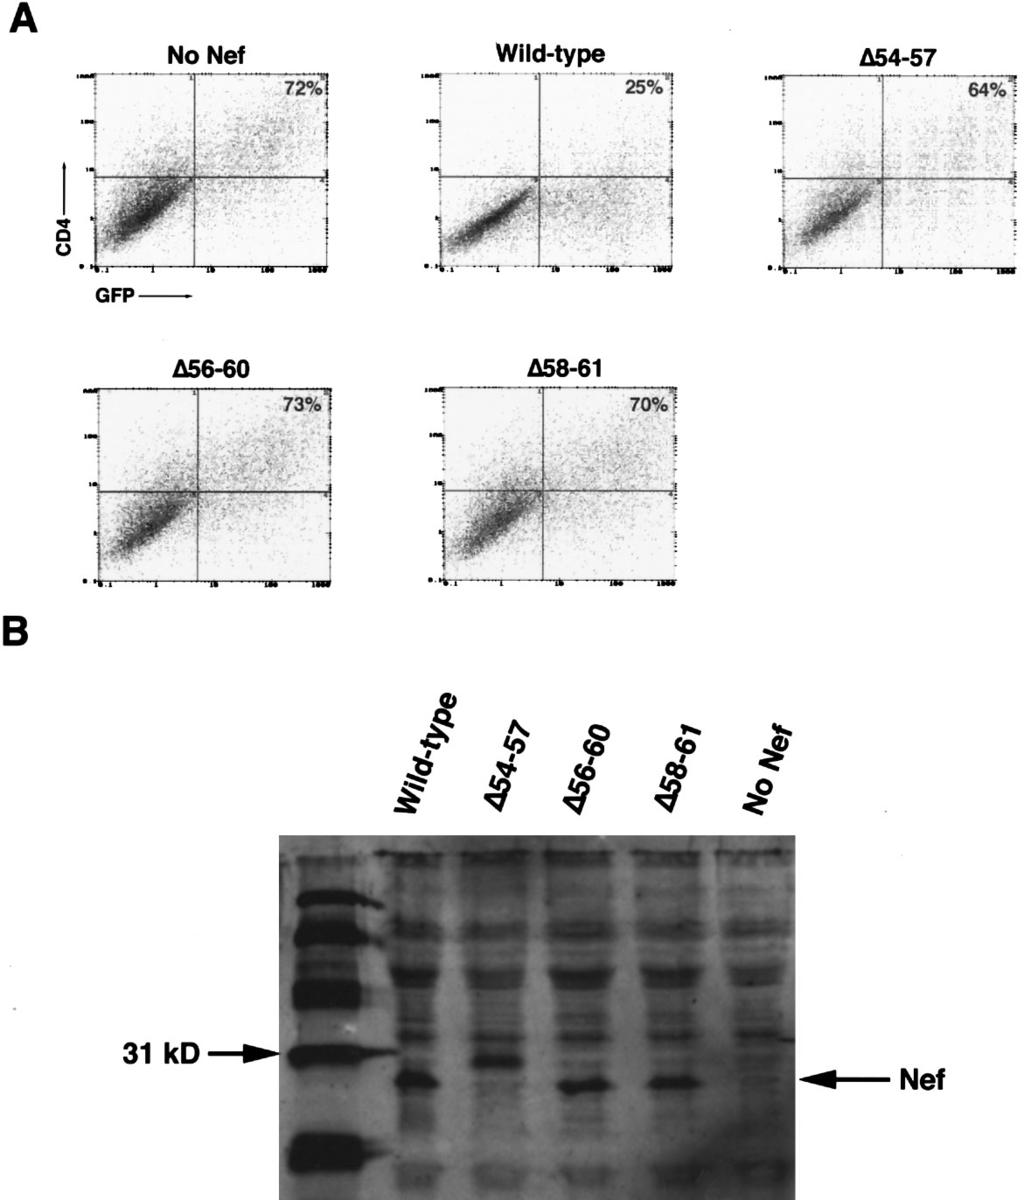 ANALYSIS OF PROTEASE CLEAVAGE SITE IN HIV-1 Nef 307 FIG. 3. (A) CD4 down-regulation in transfected 293 cells.